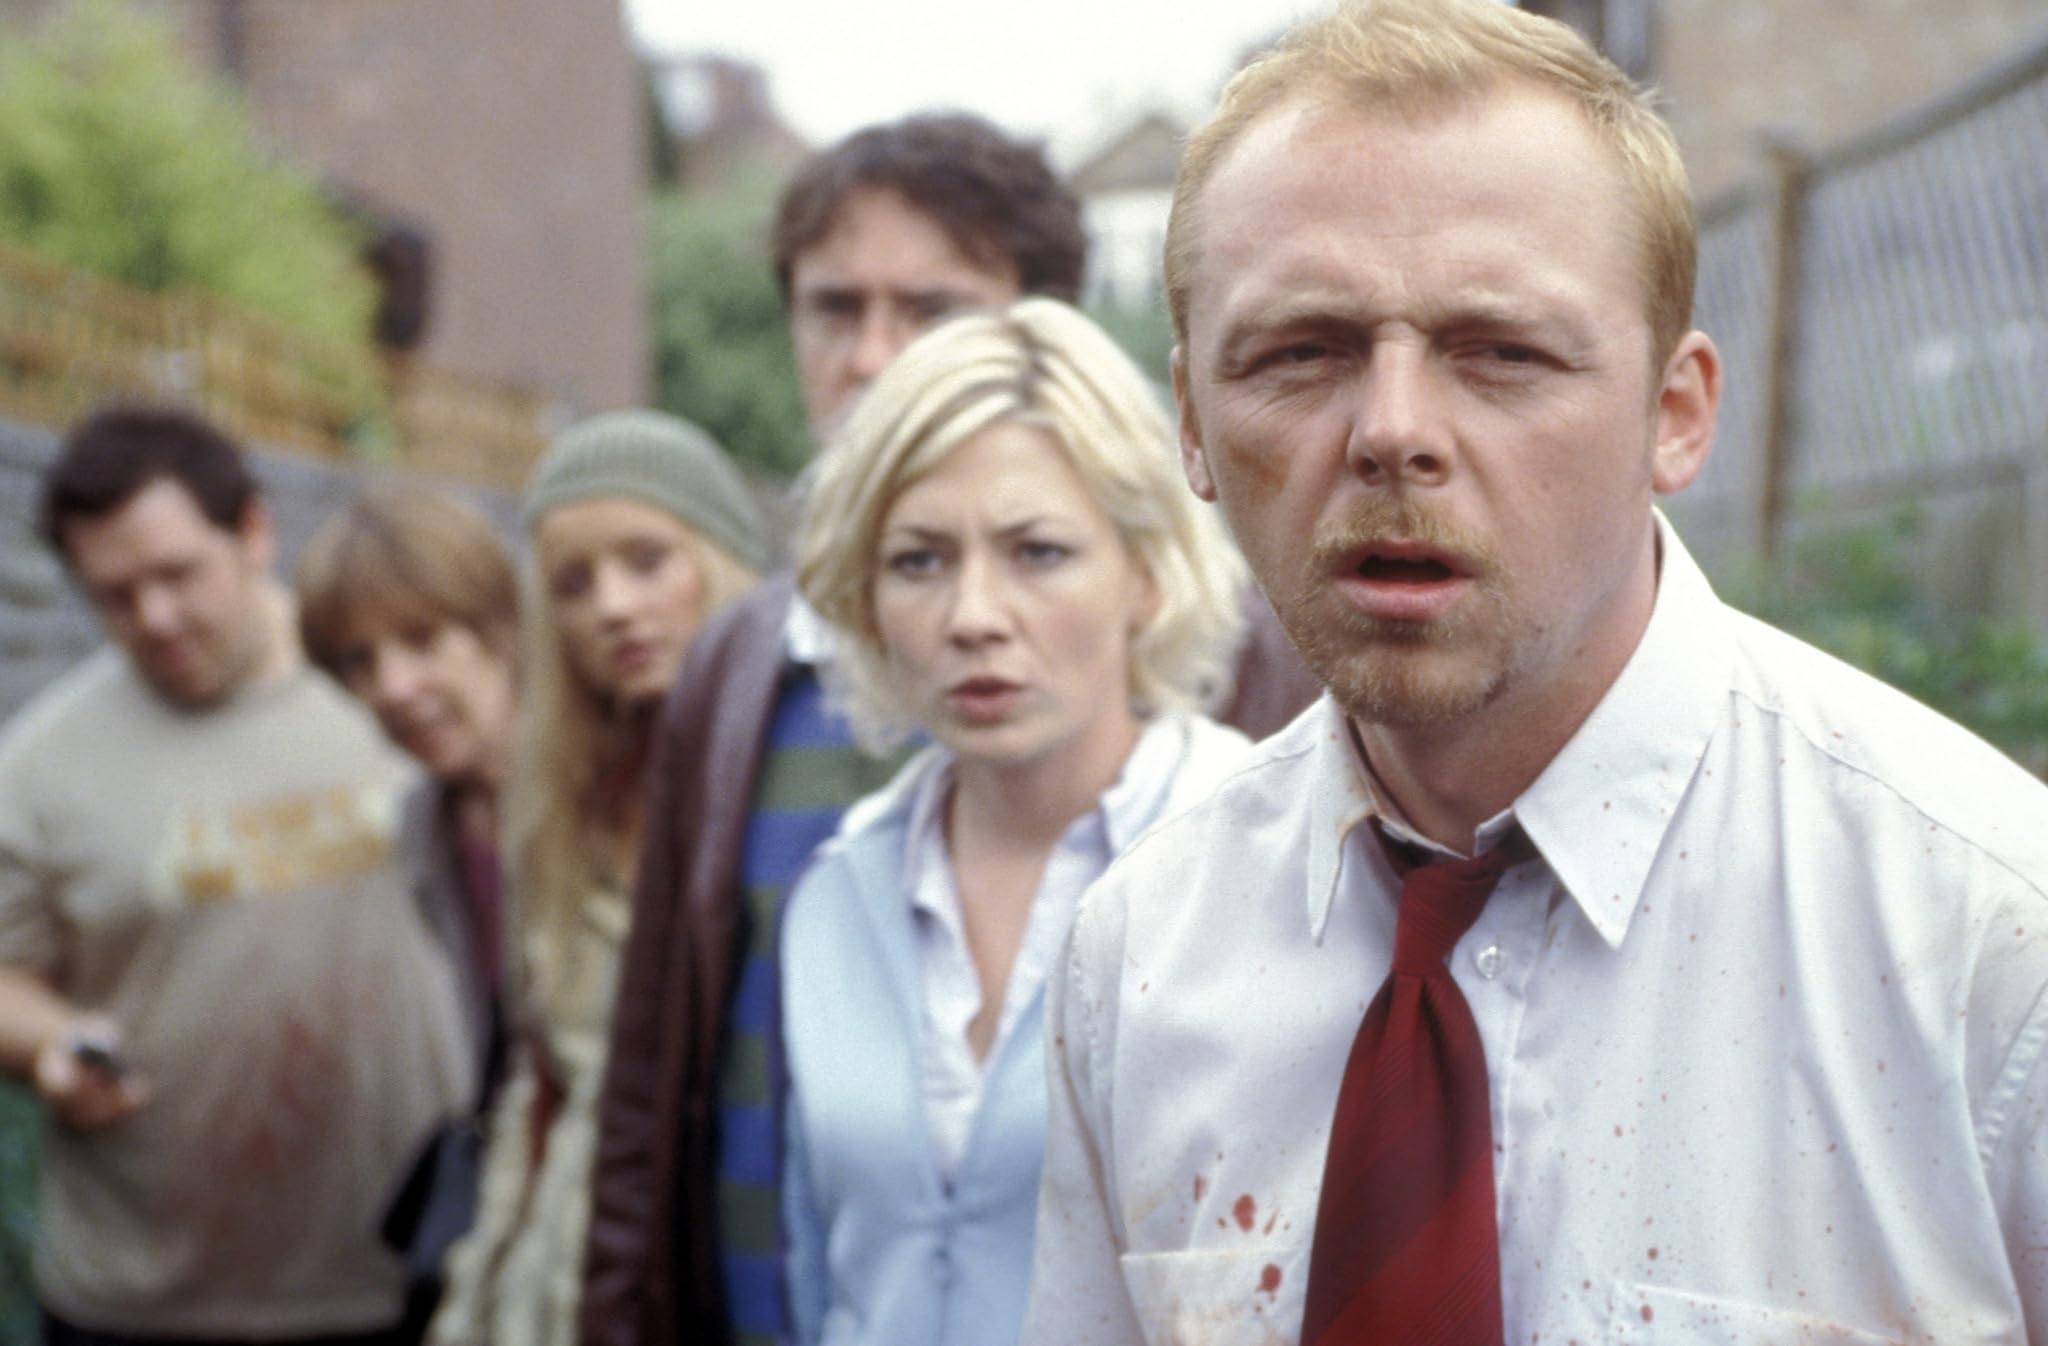 Simon Pegg (front) in a still from Shaun of the Dead. Photo: Rogue Pictures